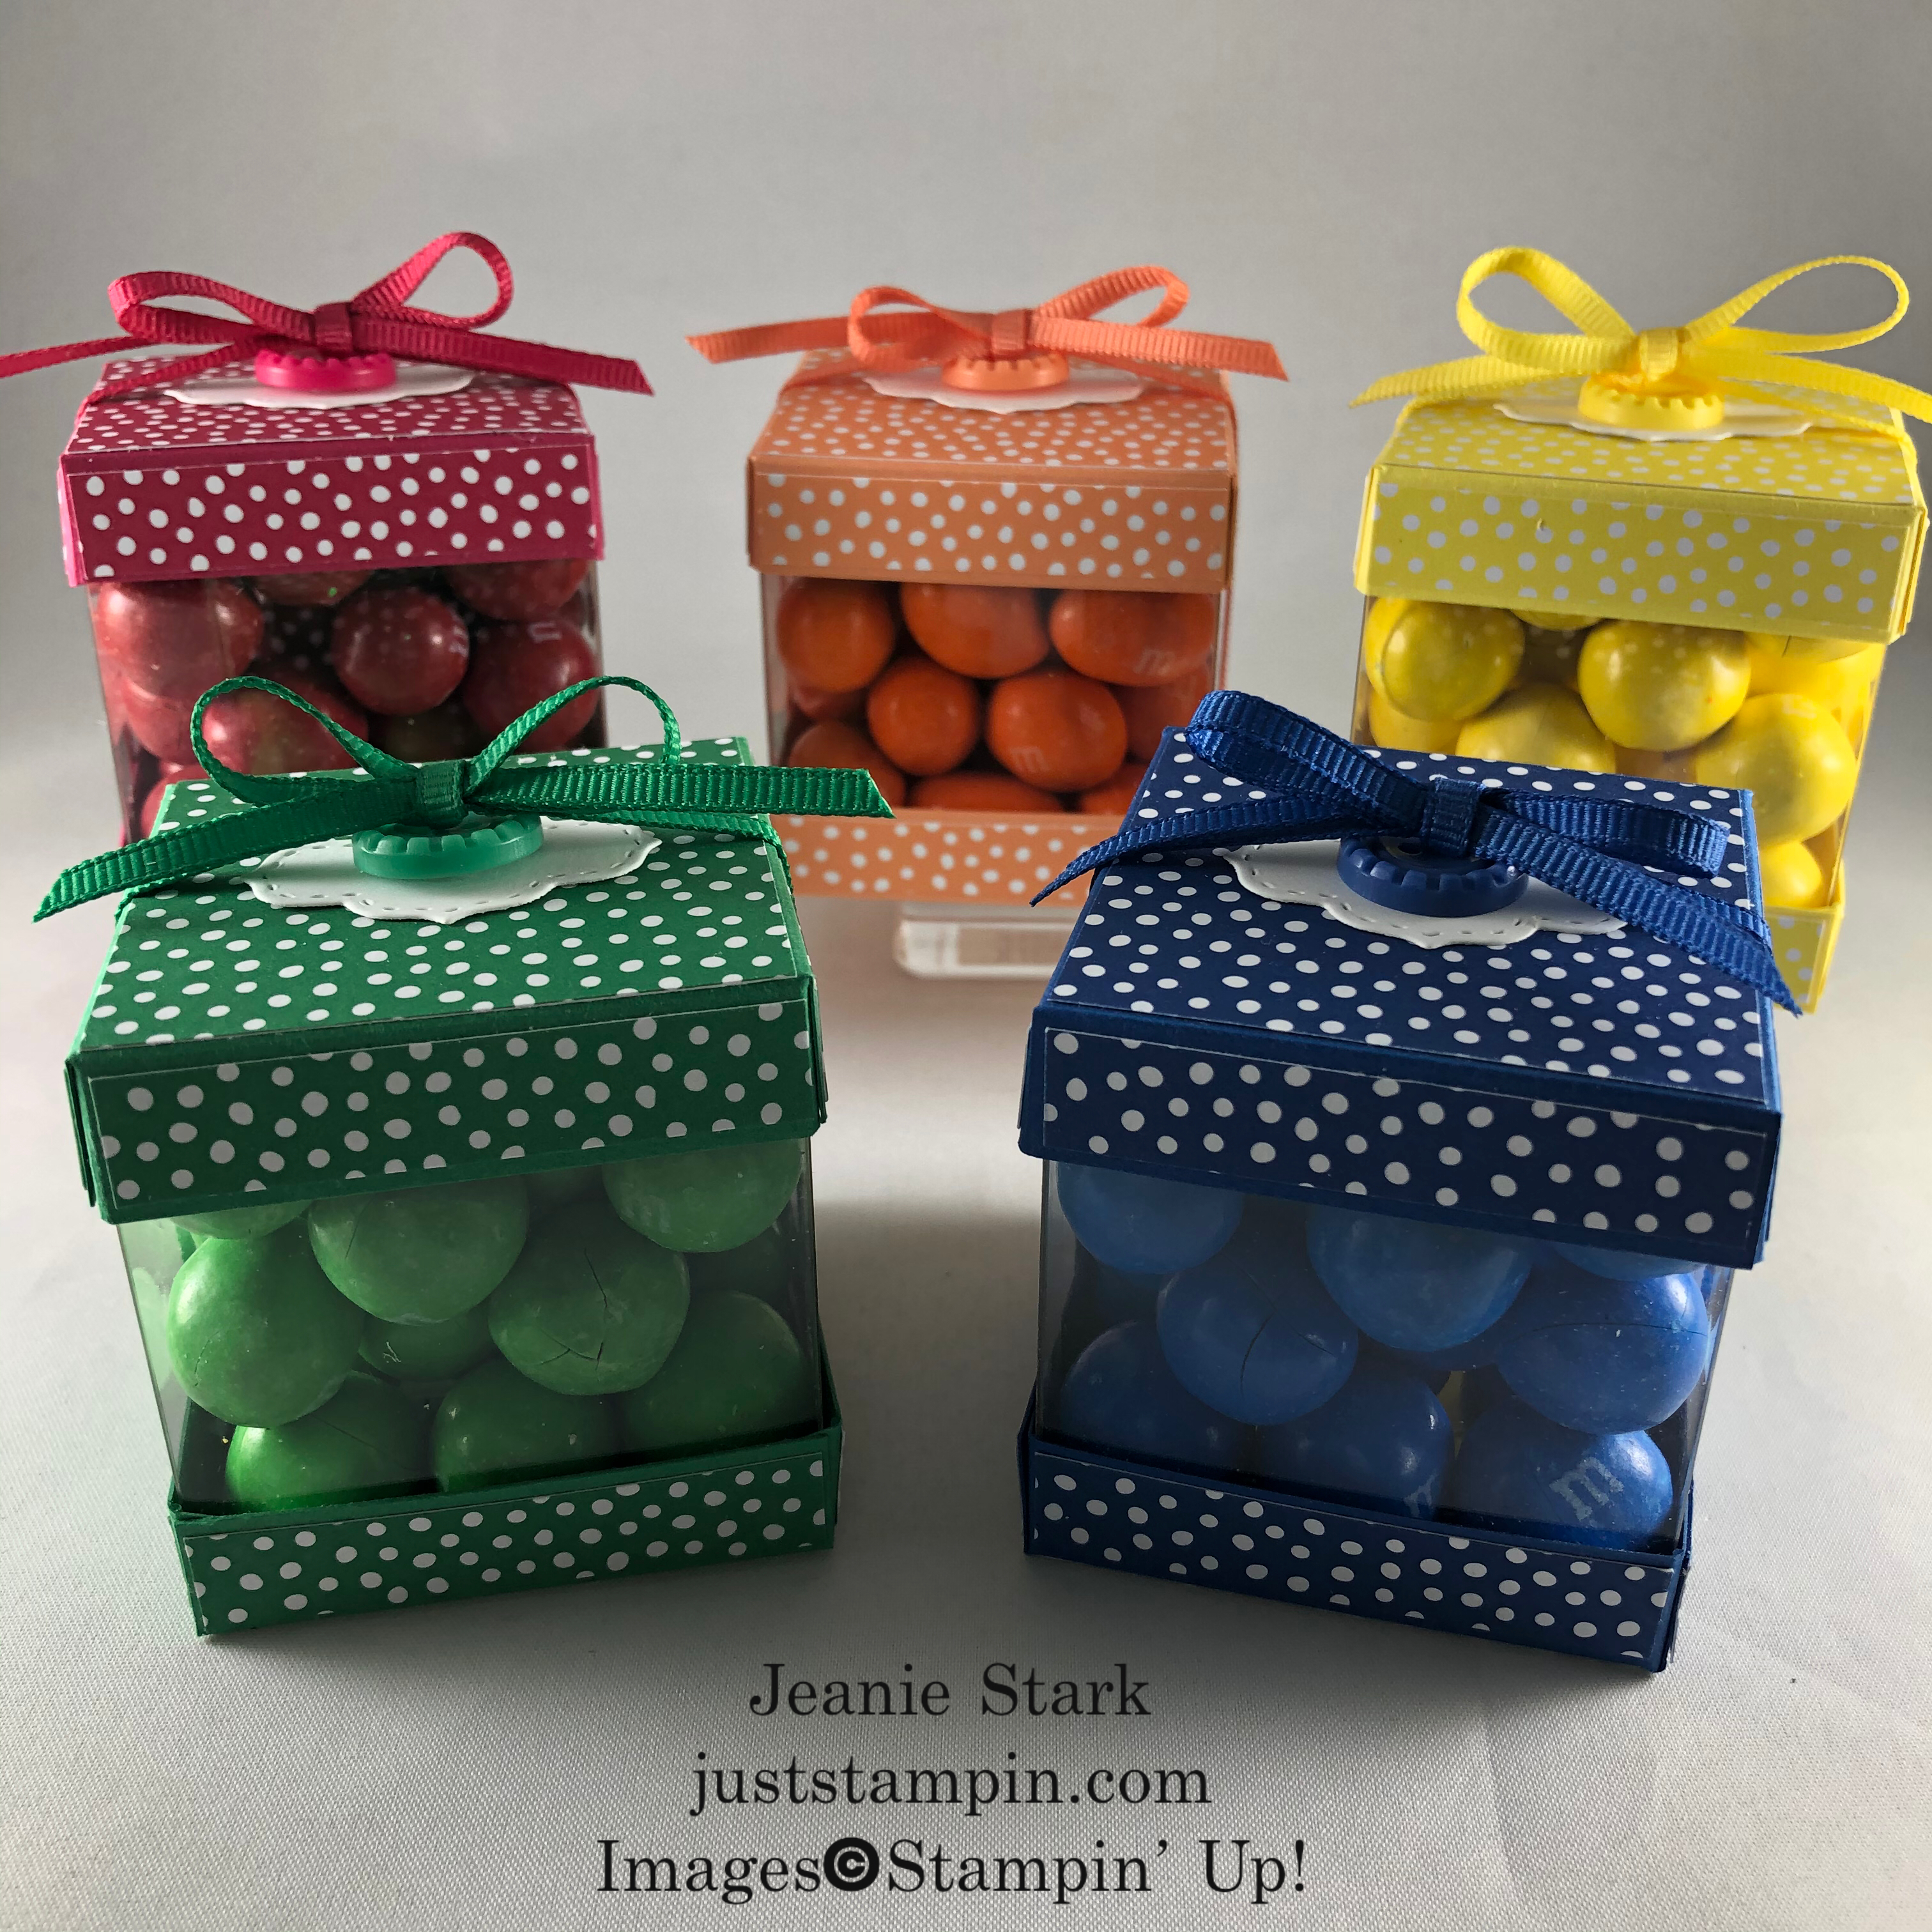 Stampin' Up! 2018-2020 In Color clear tiny treat boxes gift idea - Jeanie Stark StampinUp